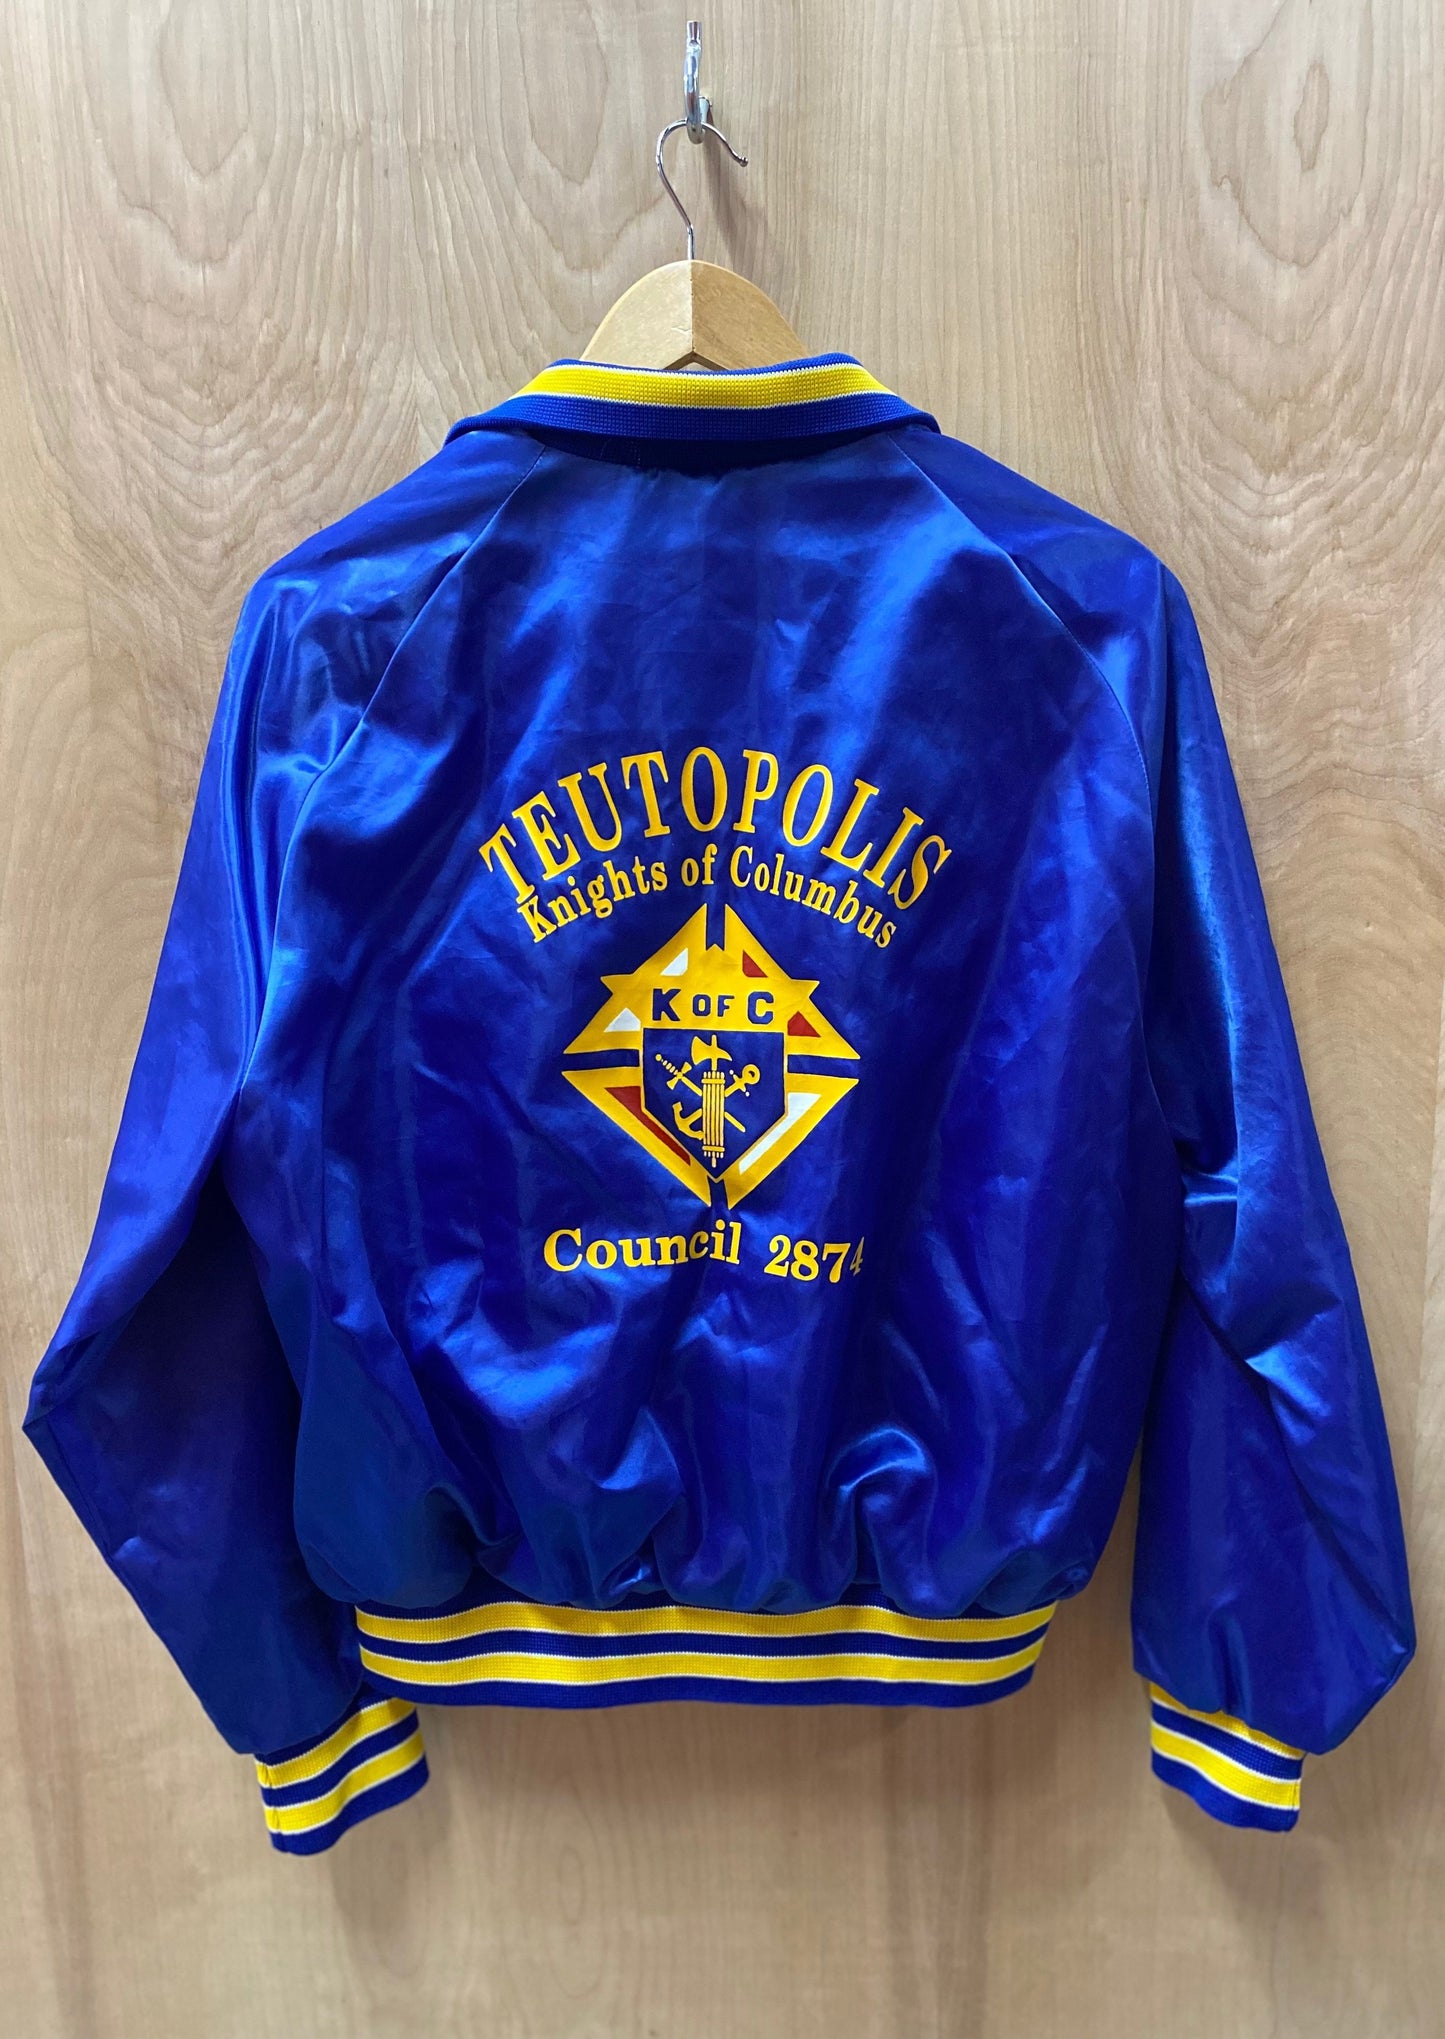 Load image into Gallery viewer, Teutopolis-Knights of Columbus Satin Bomber (4811529650256)
